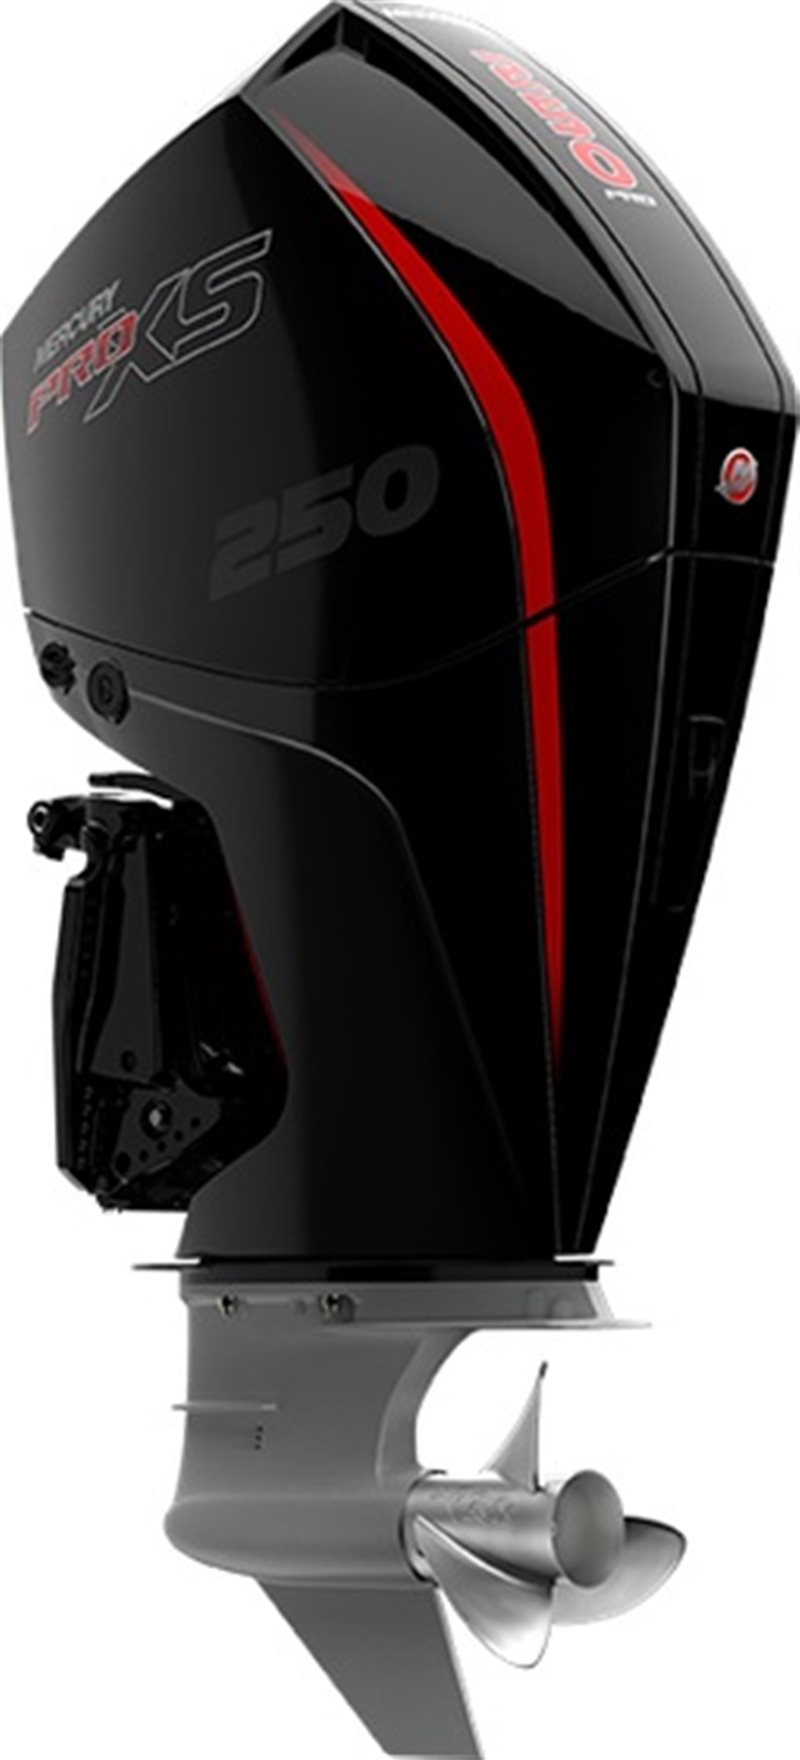 2020 Mercury Outboard Pro XS 175 - 300 Pro XS 250 at Fort Fremont Marine